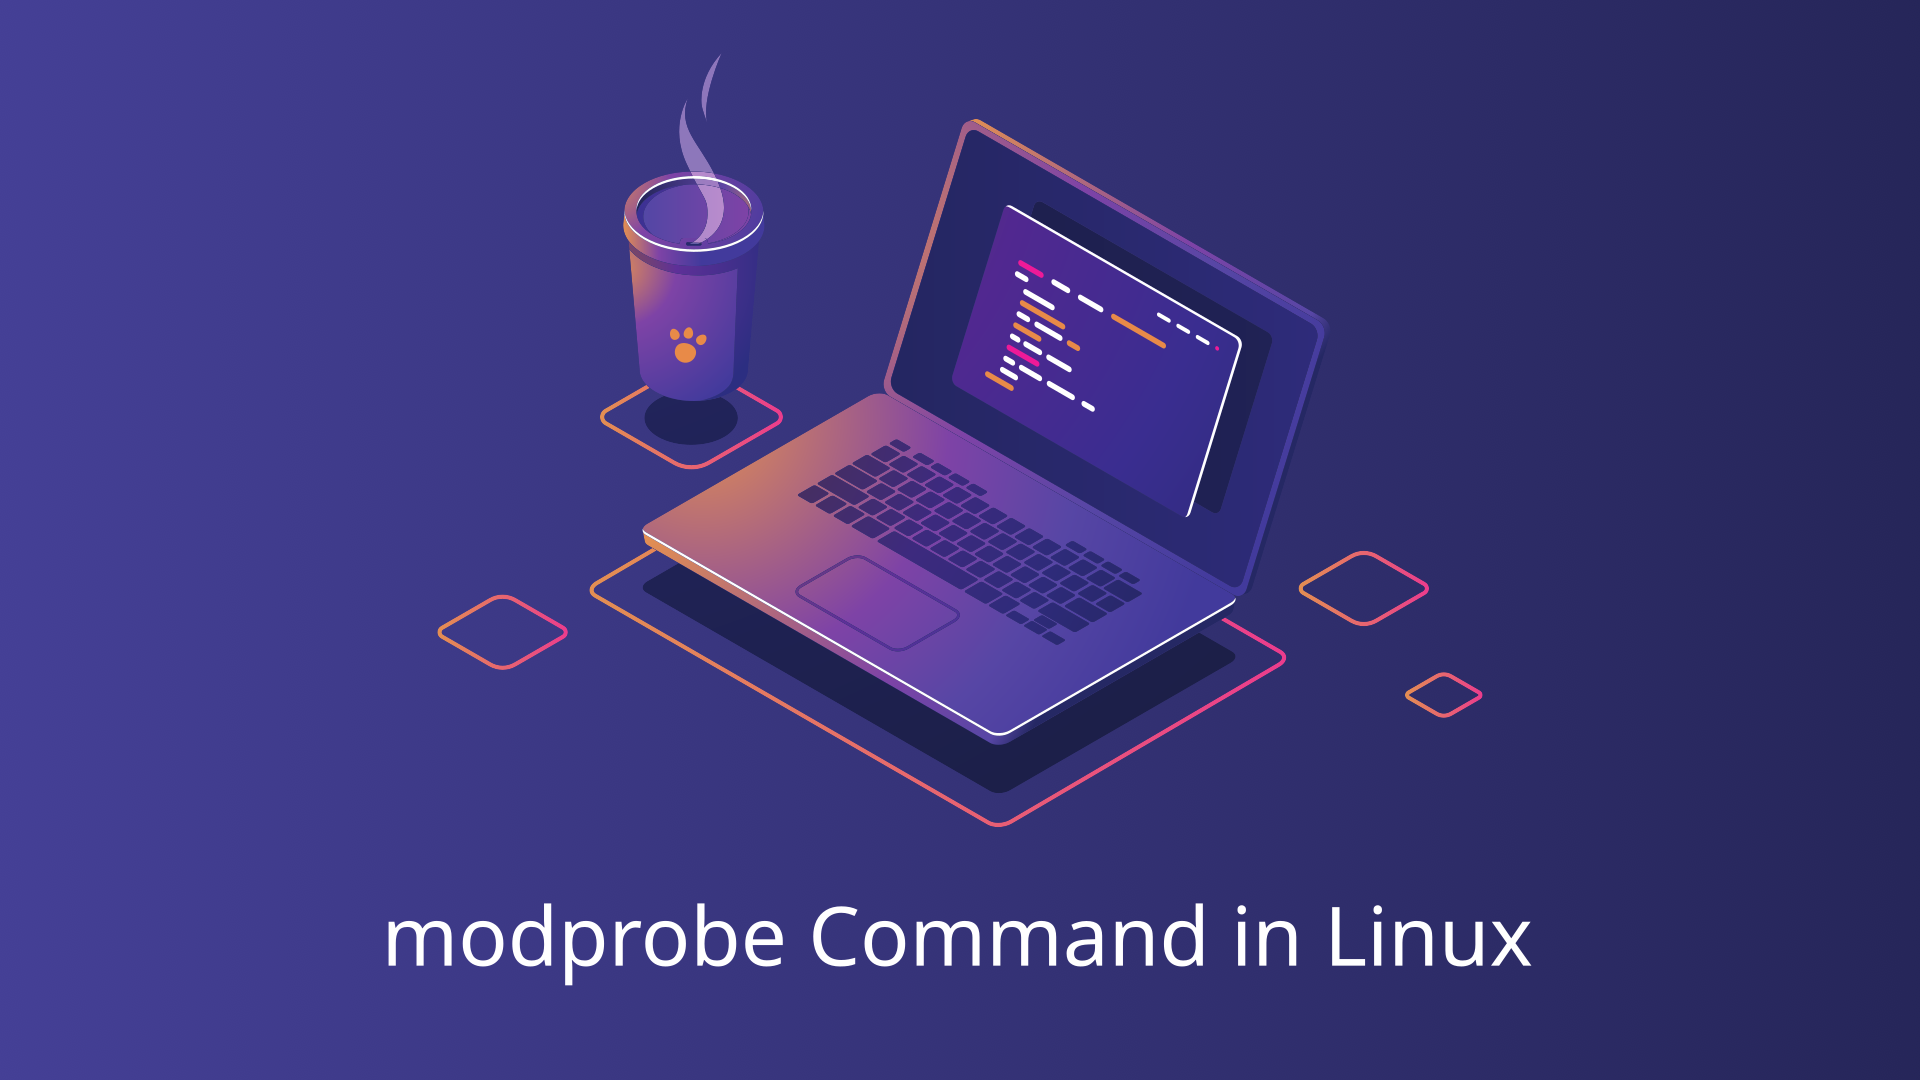 modprobe Command in Linux